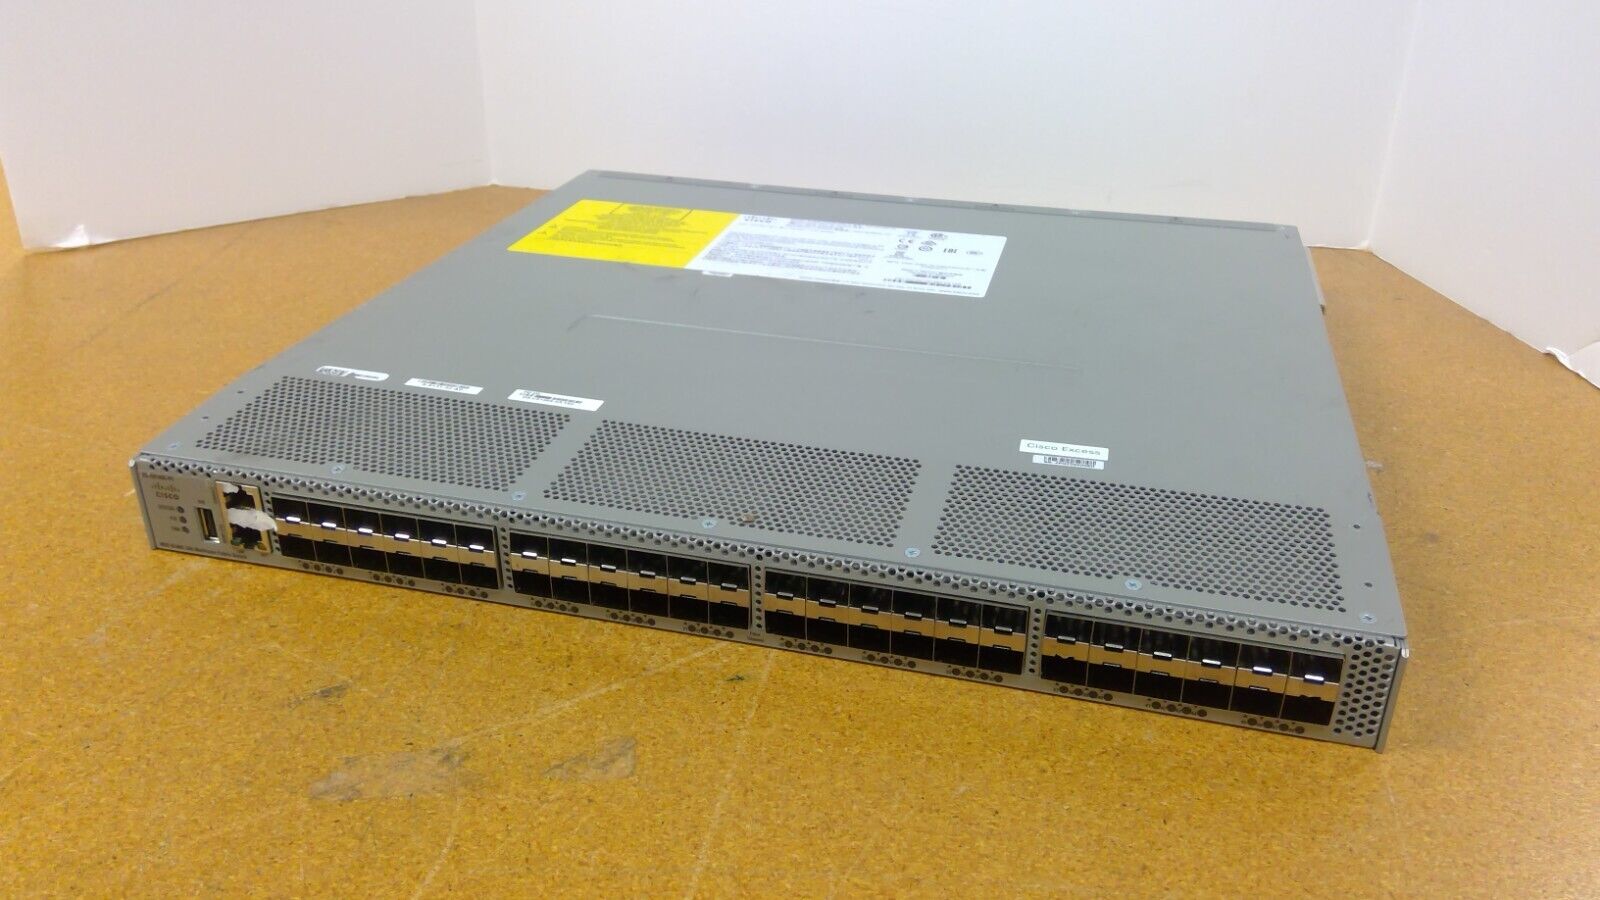 CISCO DS-C9148S-K9 Cisco MDS 9148S 16G Multilayer Fabric Switch